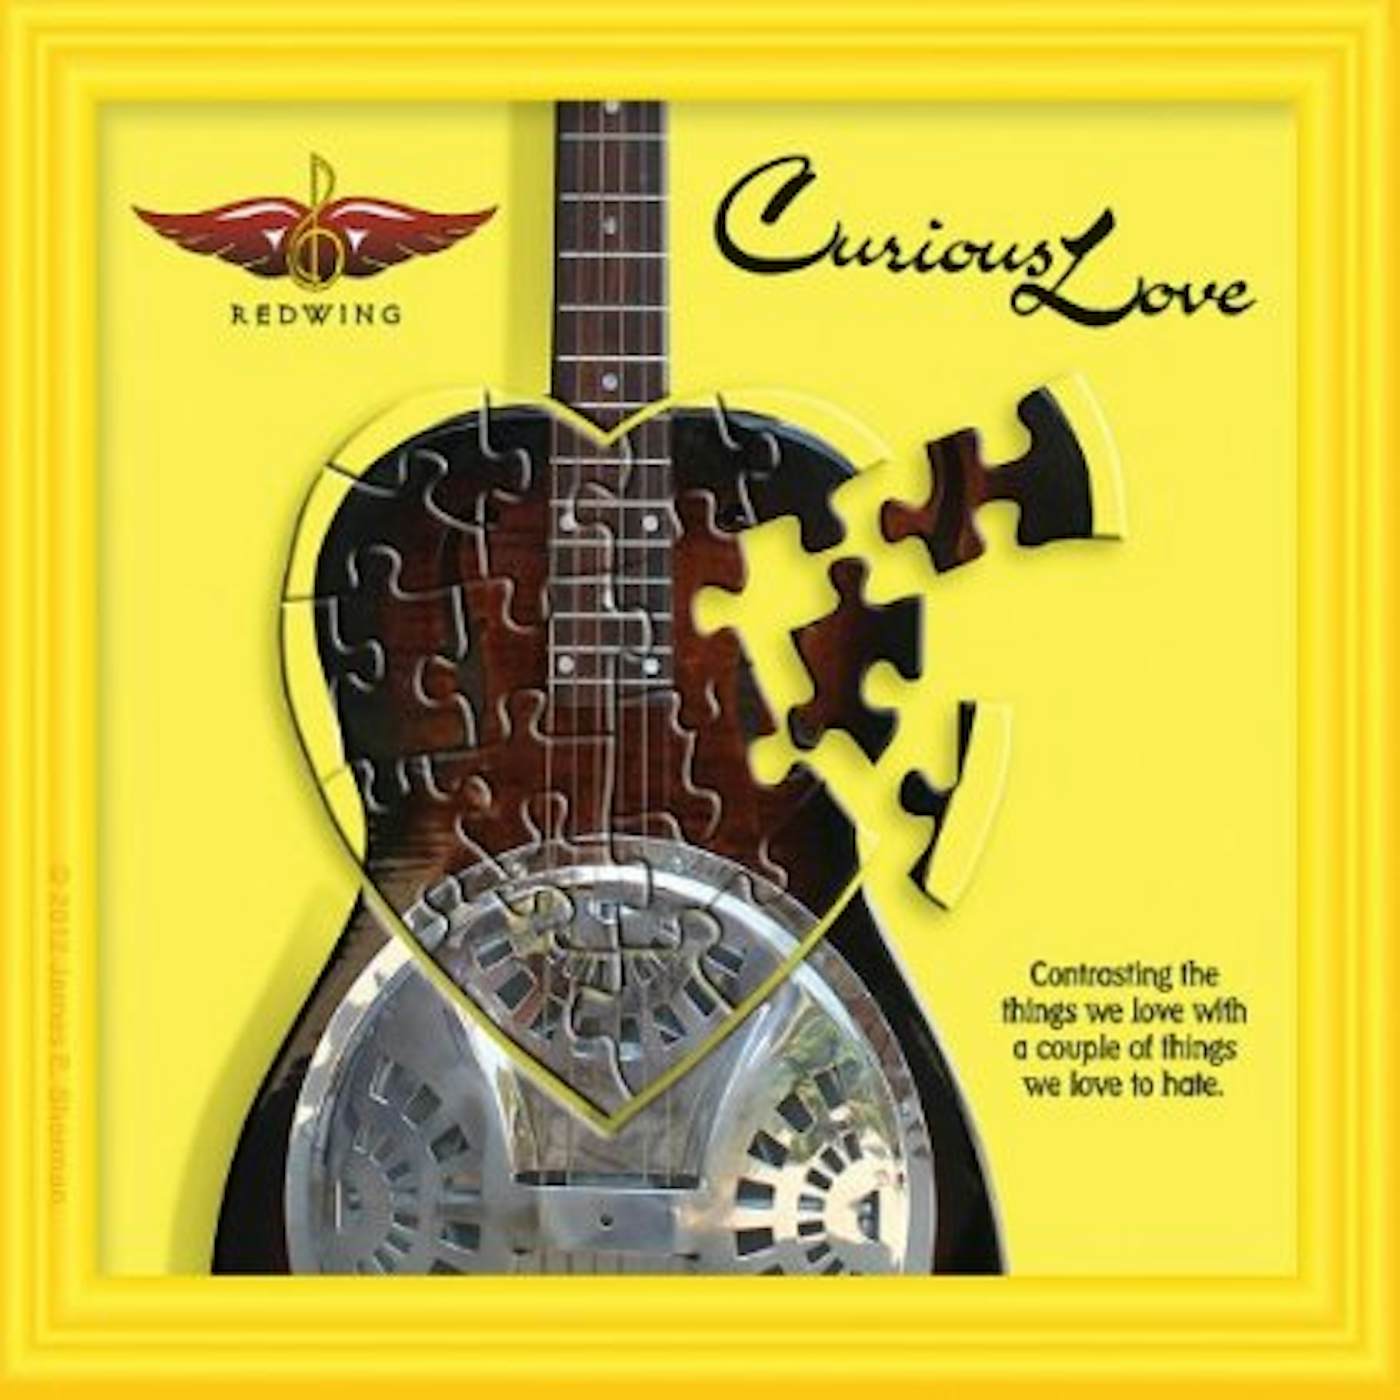 Redwing CURIOUS LOVE CD